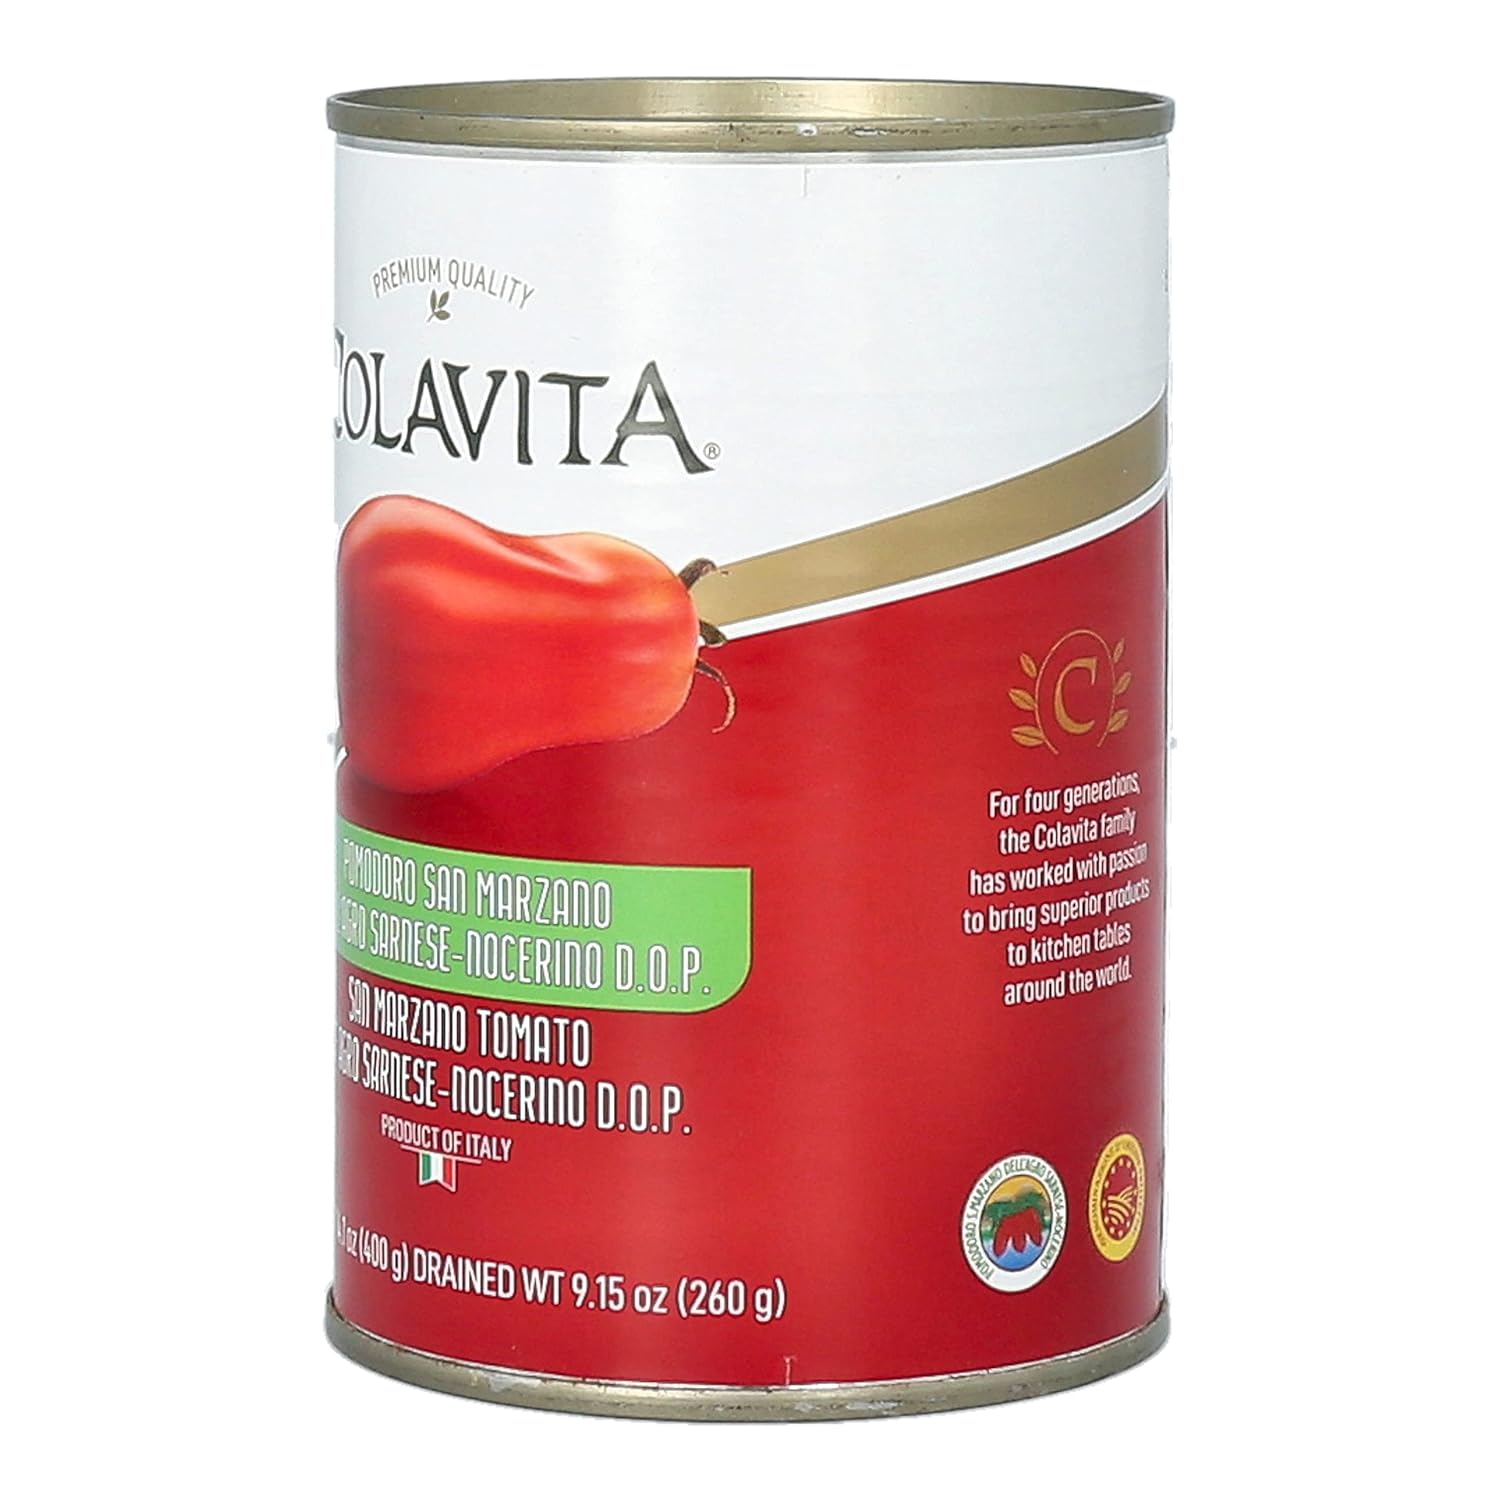 Colavita Canned Tomatoes - San Marzano, 14.1oz Can : Grocery & Gourmet Food